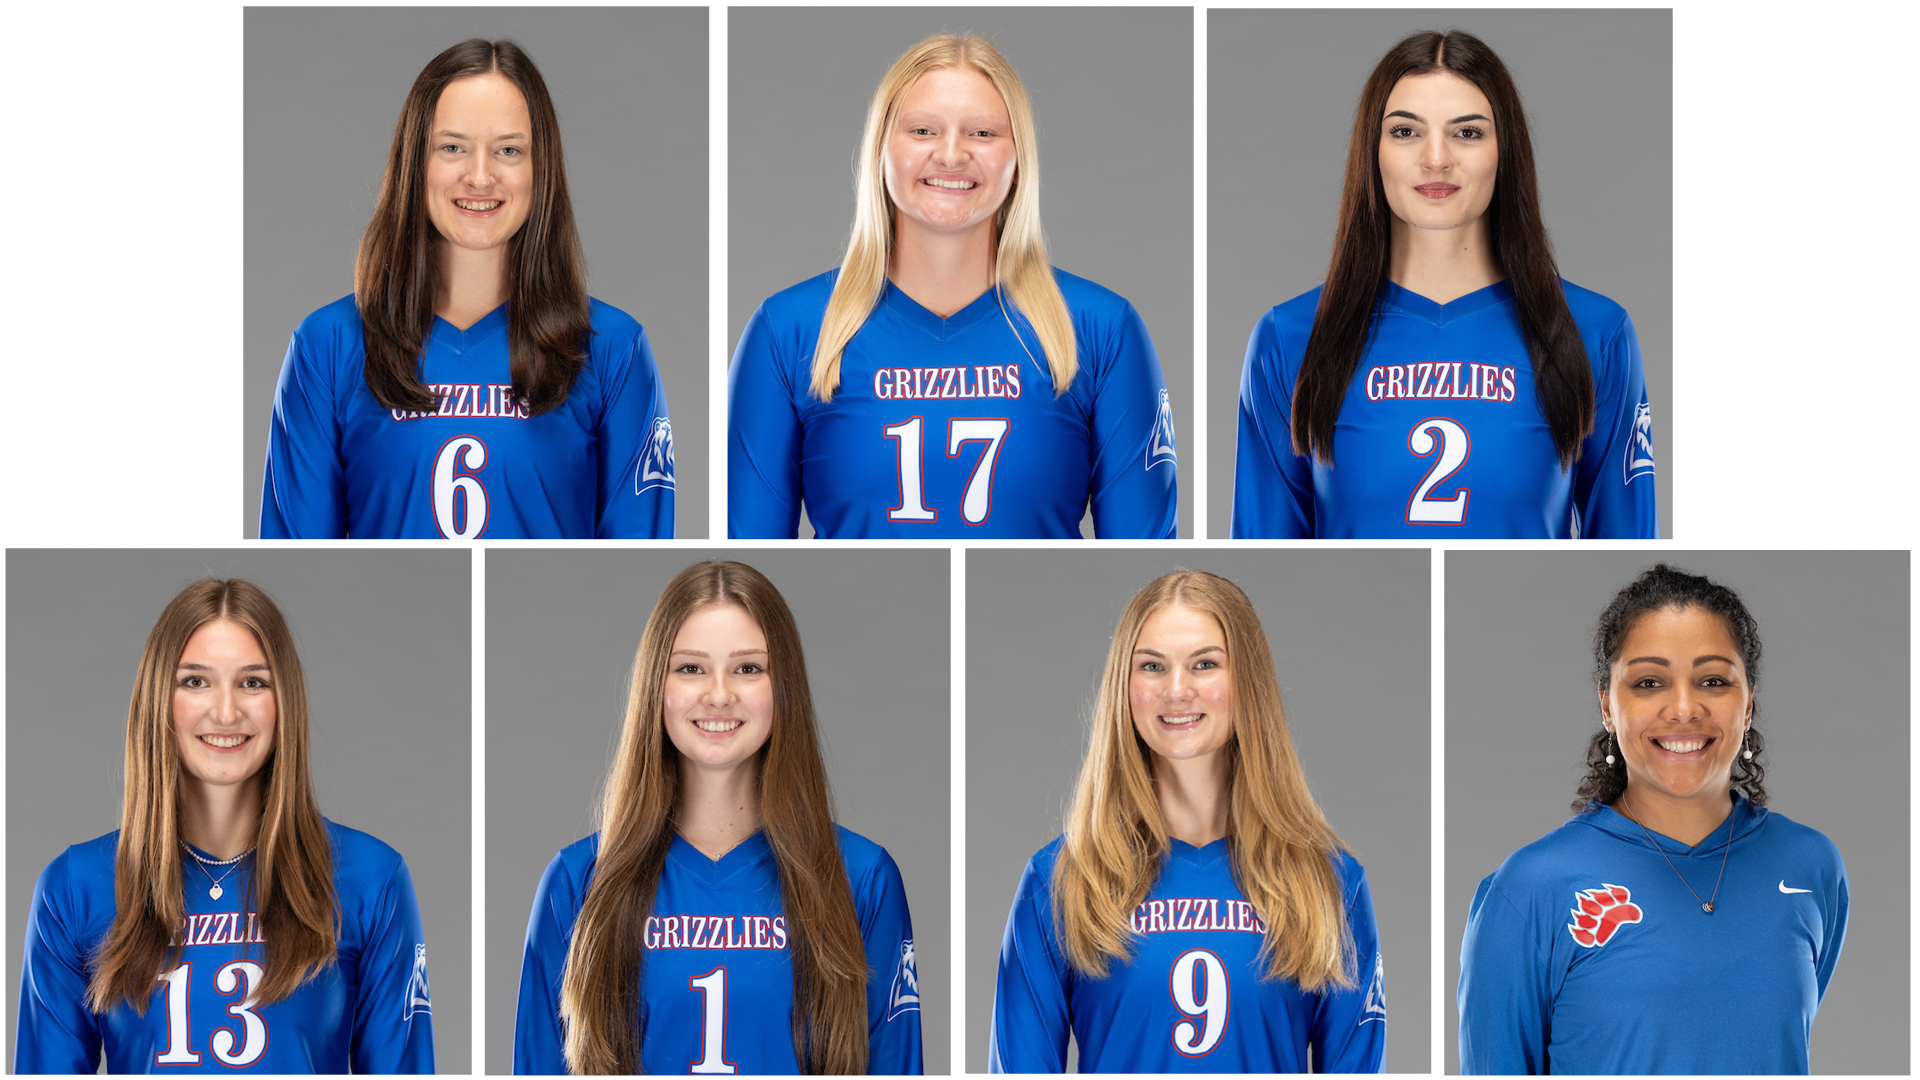 Grizzly Volleyball players earn all-region, all-conference honors; Figueiredo named Coach of the Year